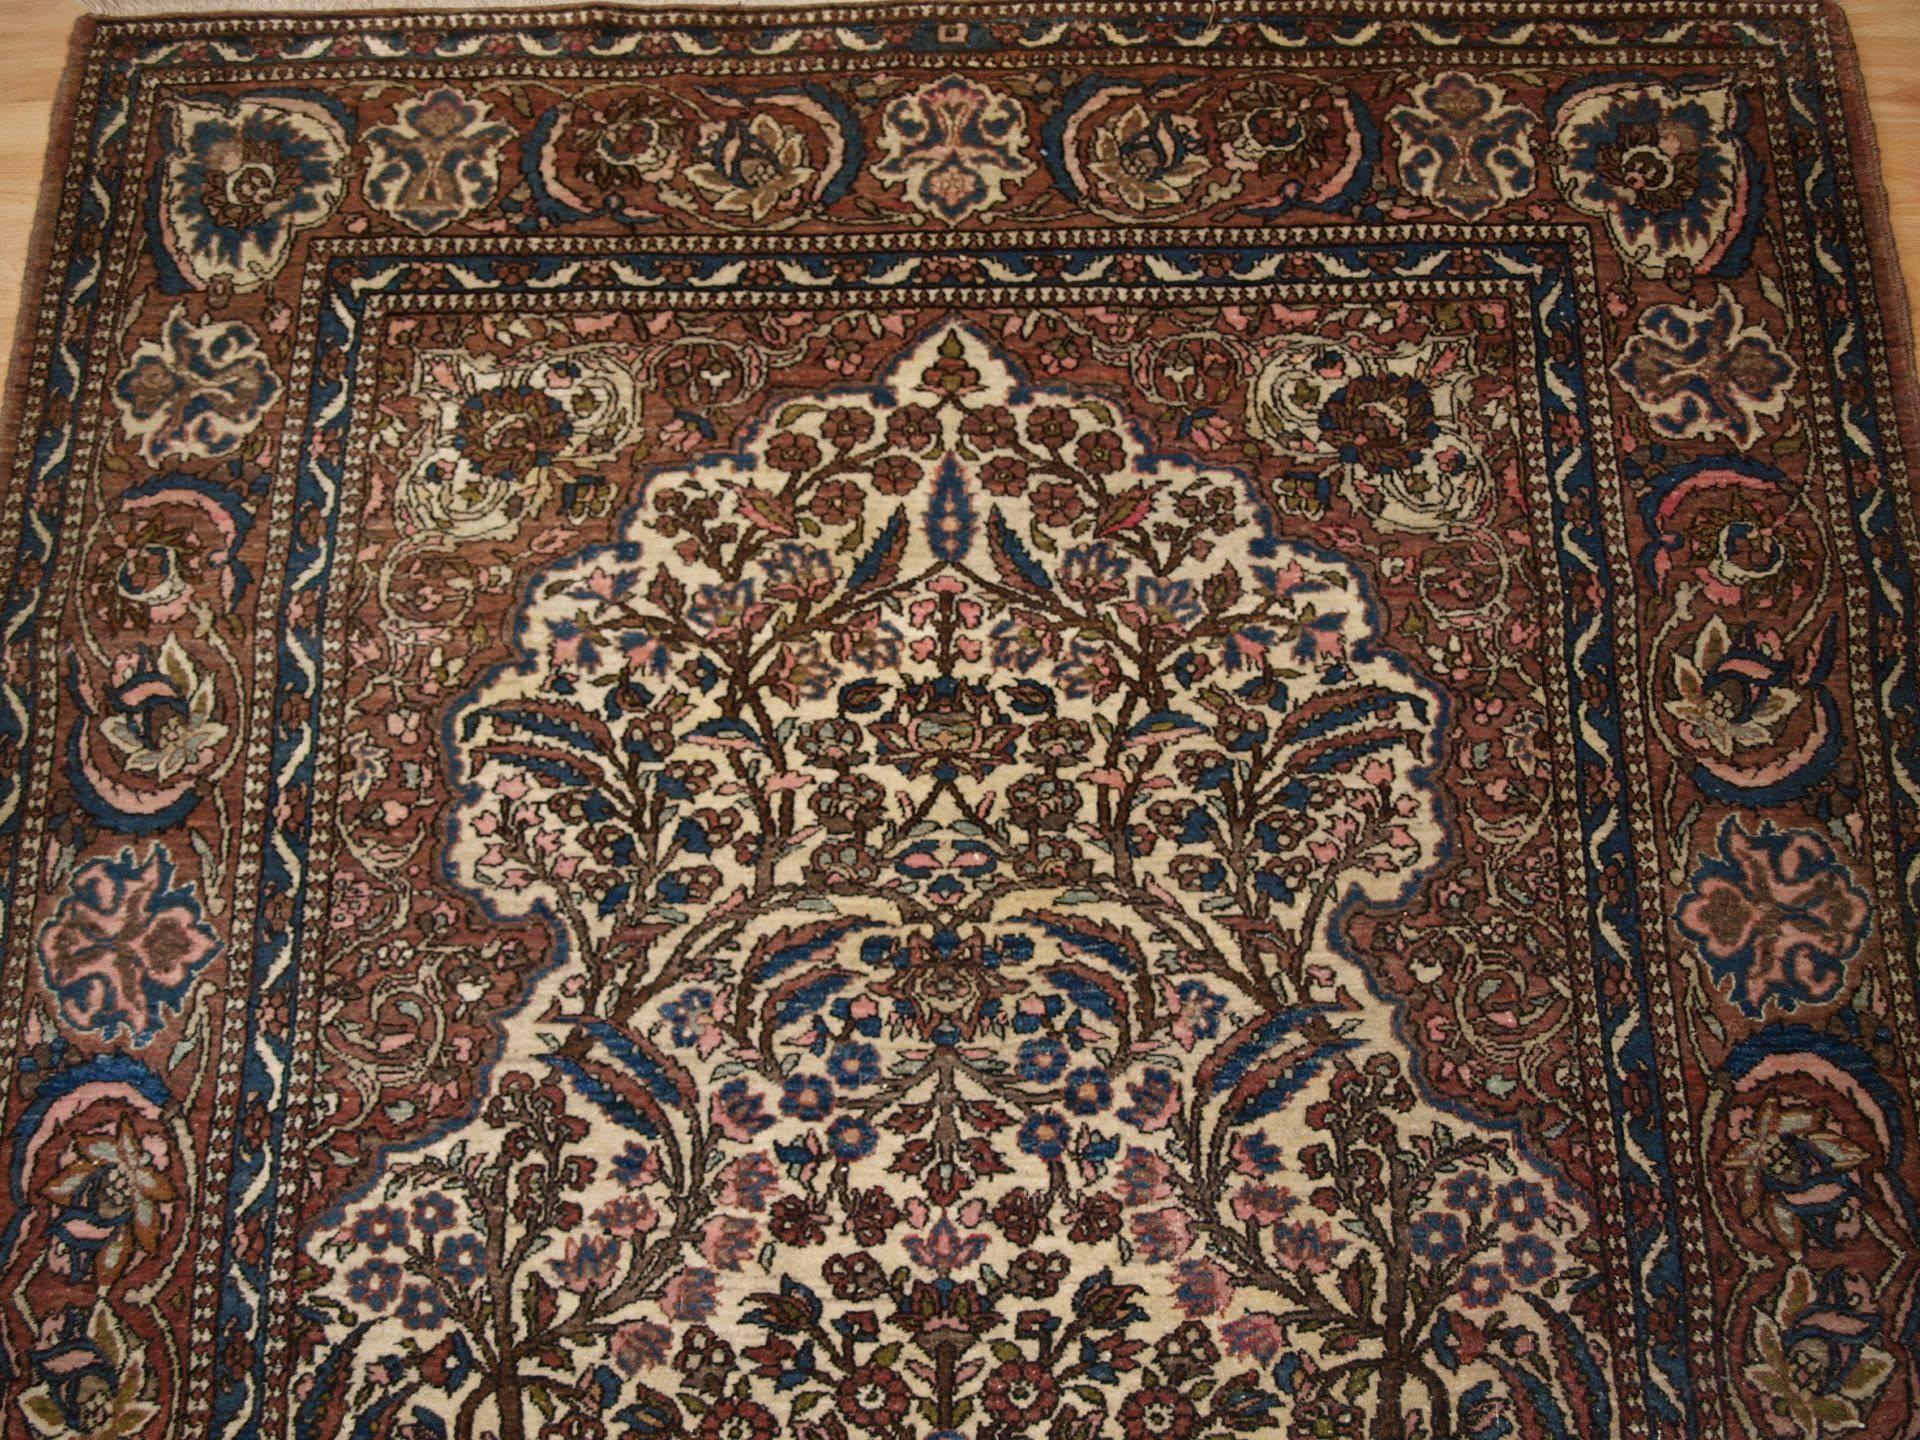 Isfahan Prayer Rug with a Very Traditional Floral Vase Design, circa 1900 For Sale 1